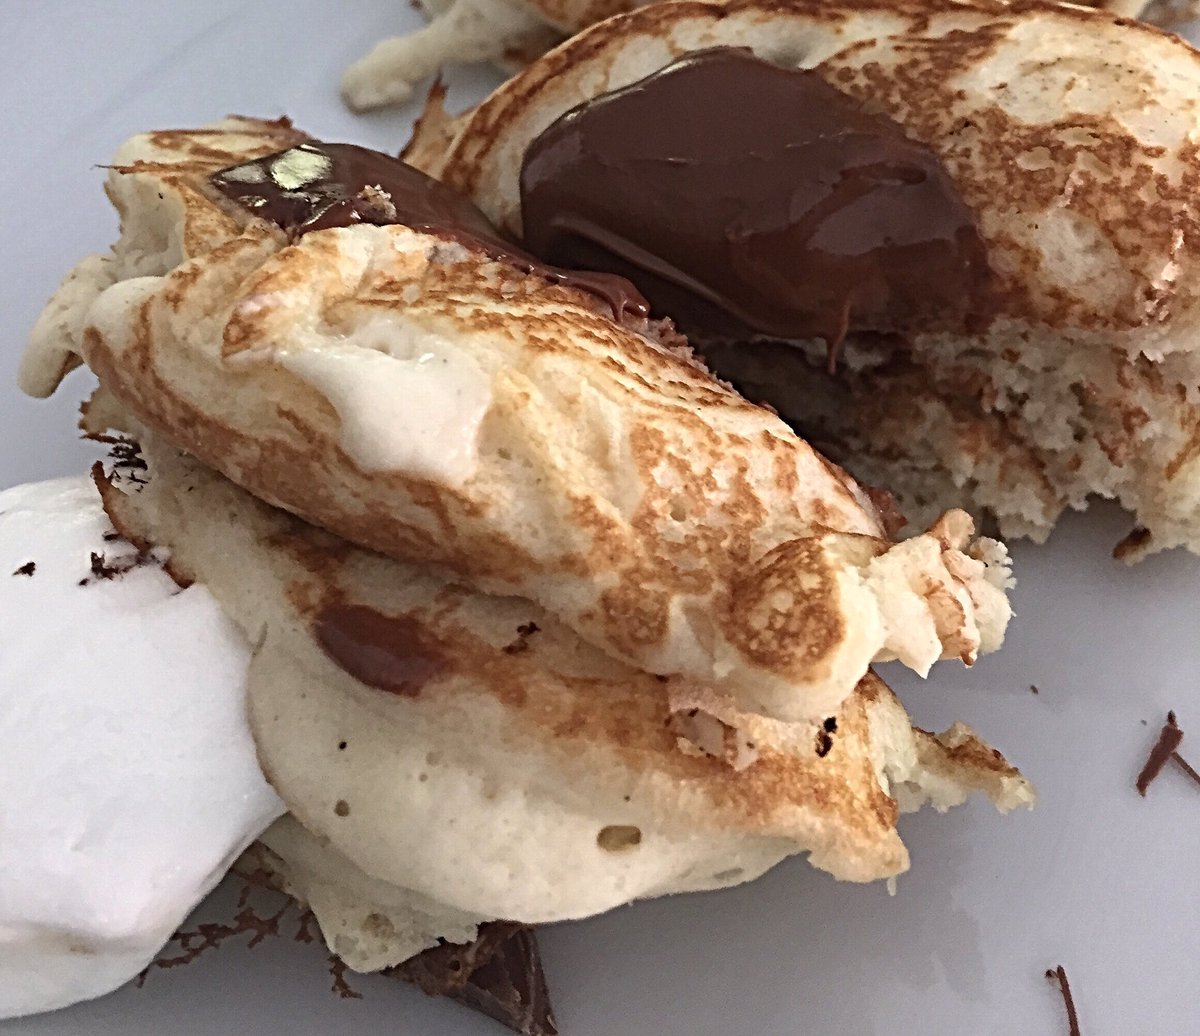 S'MORE PANCAKES! I am in!! https://t.co/KAfdBfzaRE